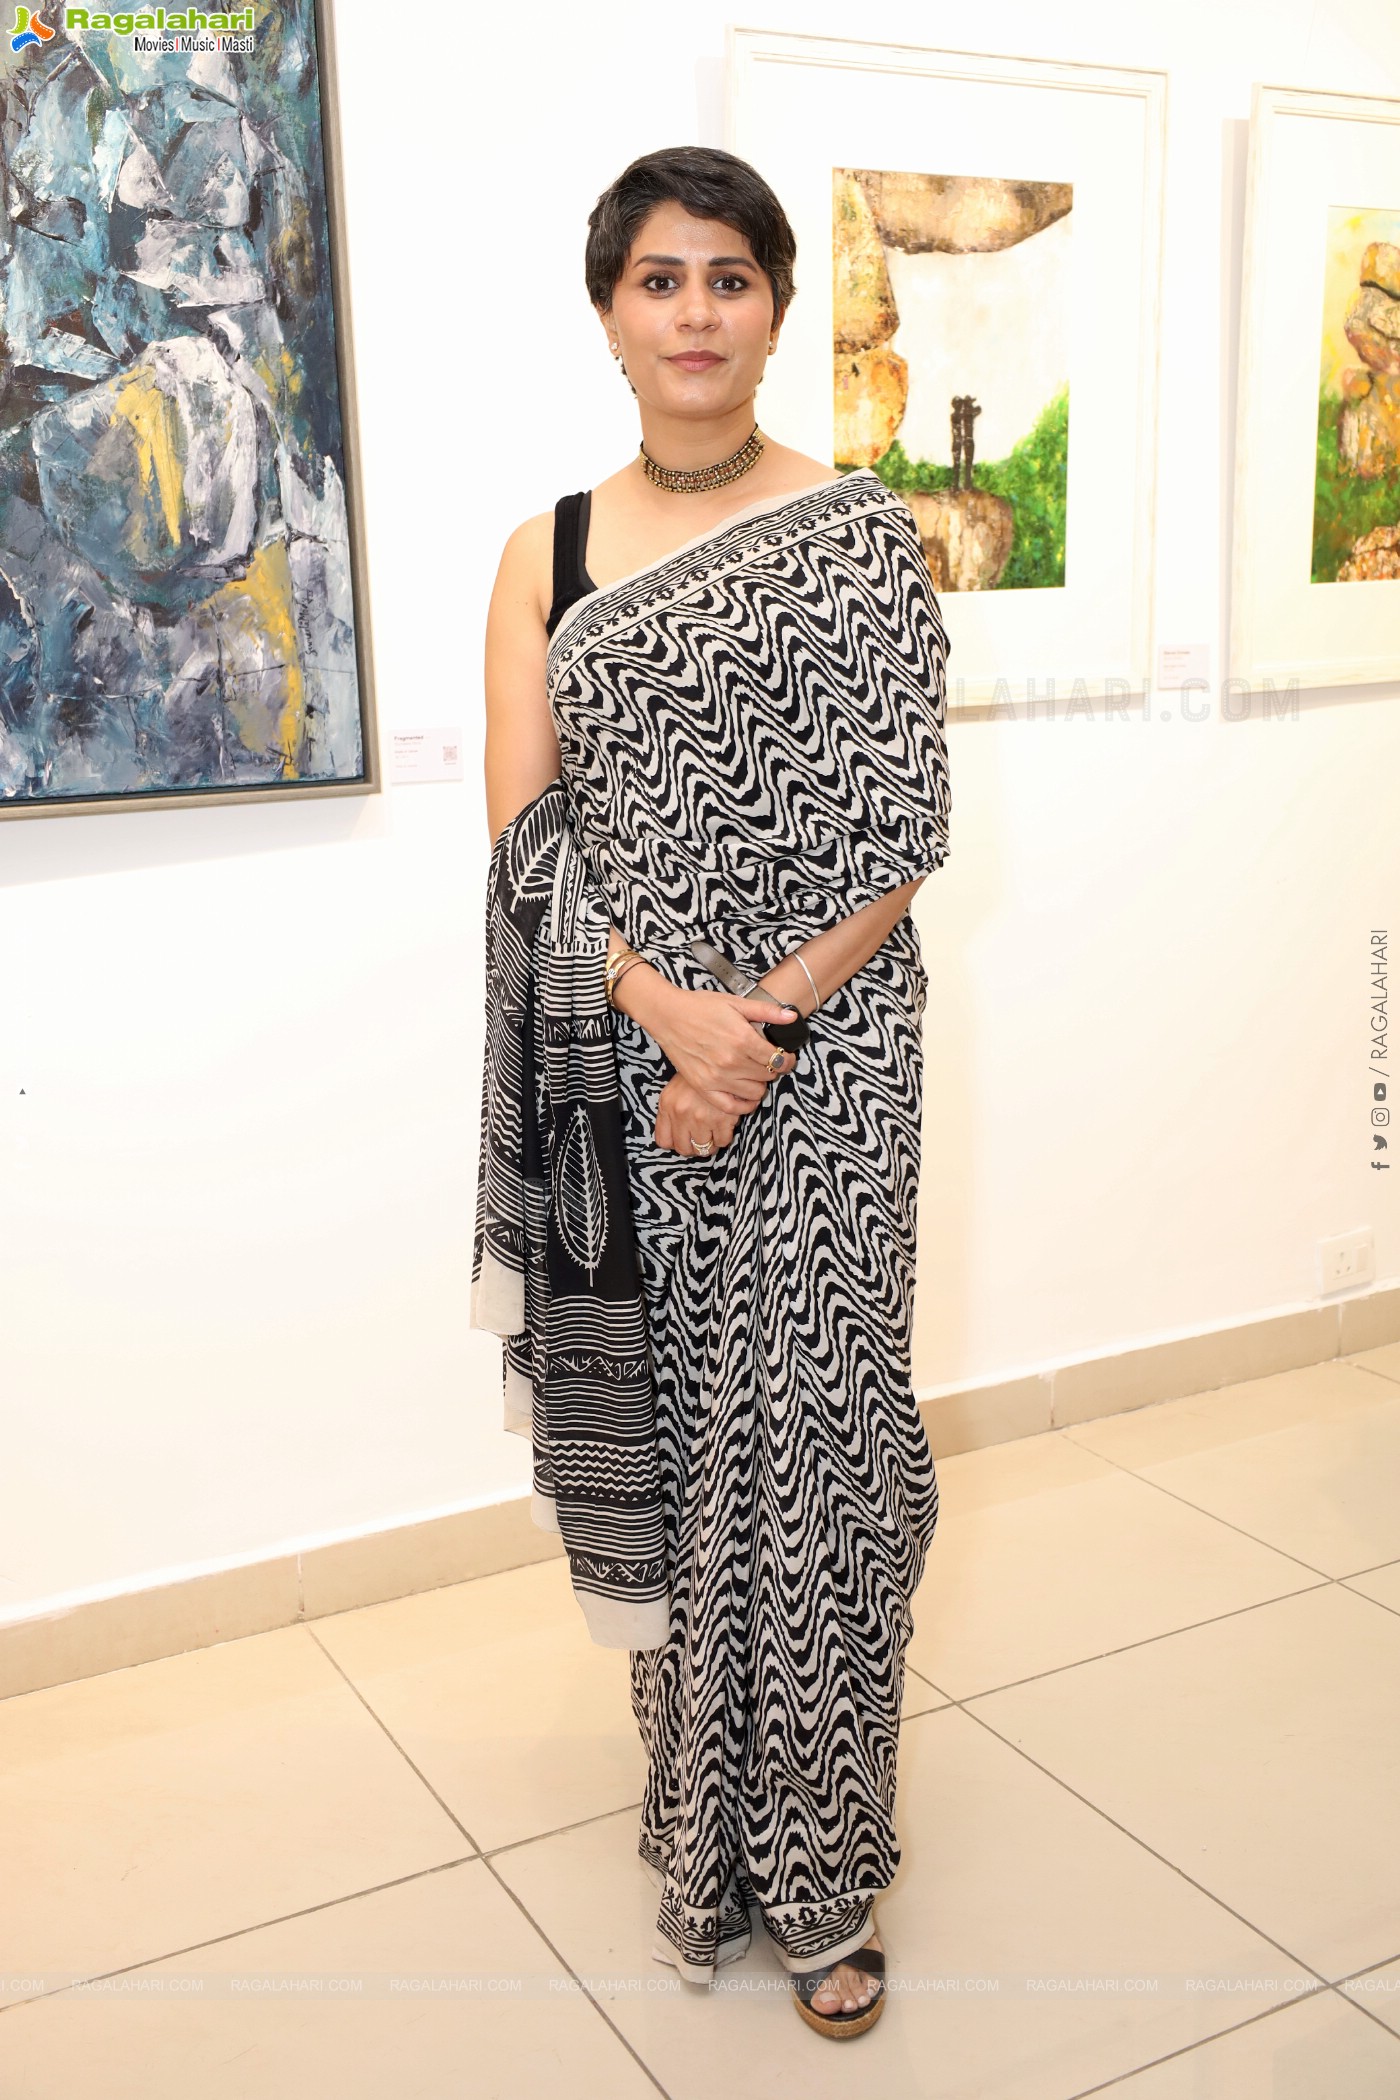 Sentinels of Hyderabad: An art show showcasing the boulders of Hyderabad and beyond